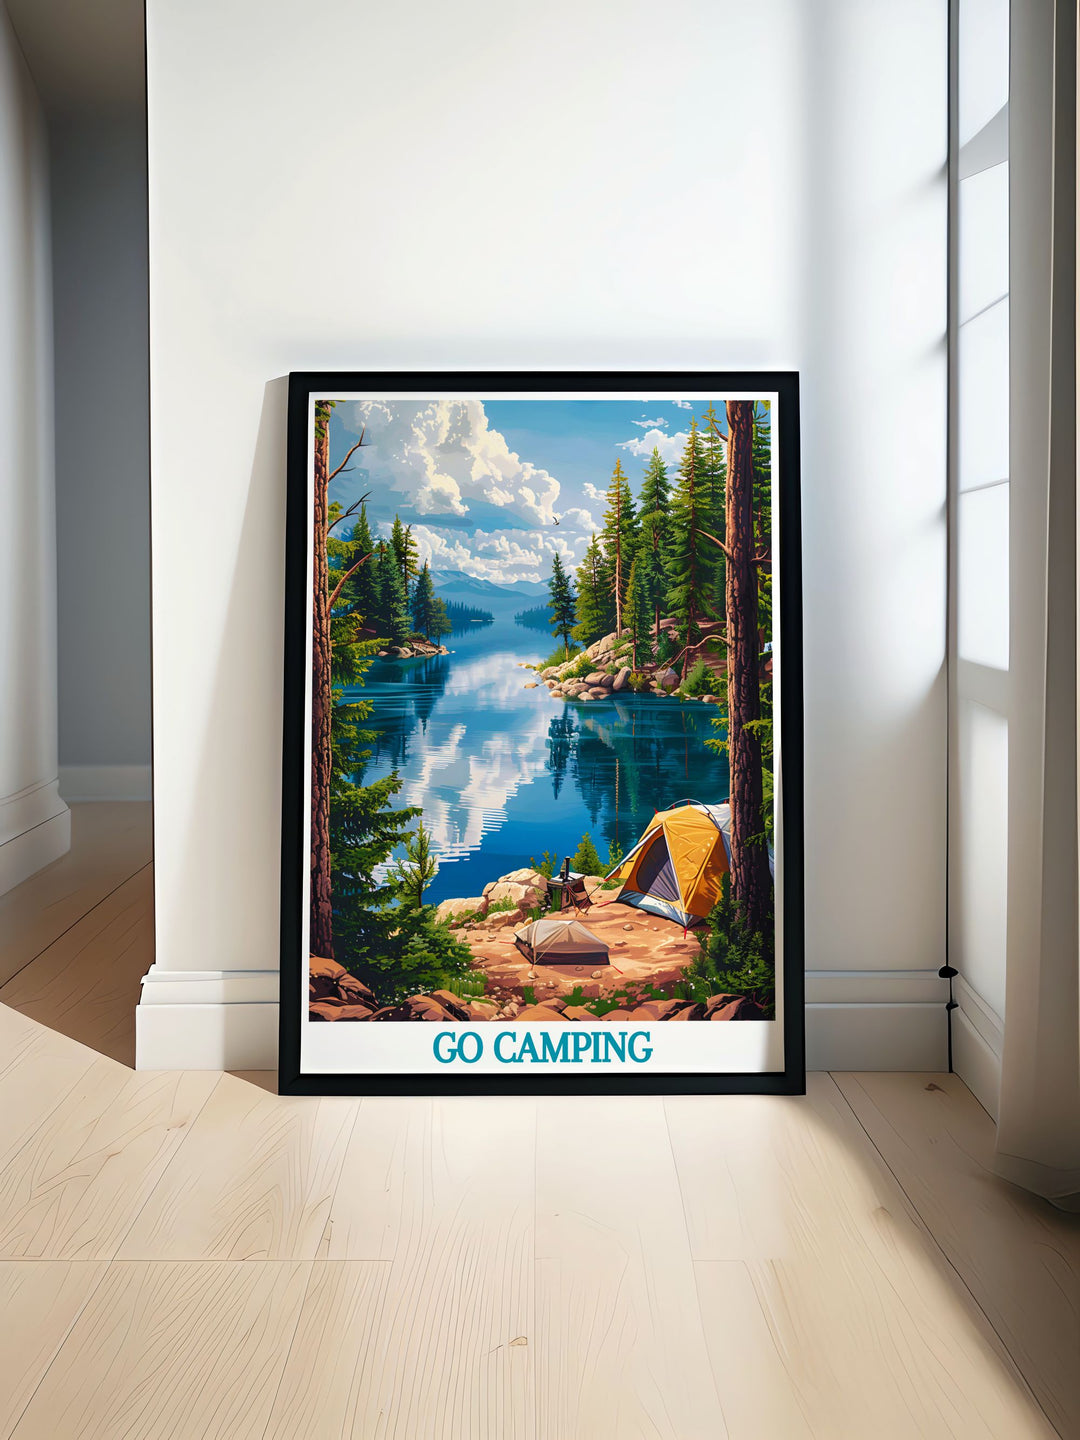 Custom print of a peaceful camping site by a river, illustrating the beauty of outdoor adventures and the simplicity of vanlife, ideal for those who appreciate nature and freedom.